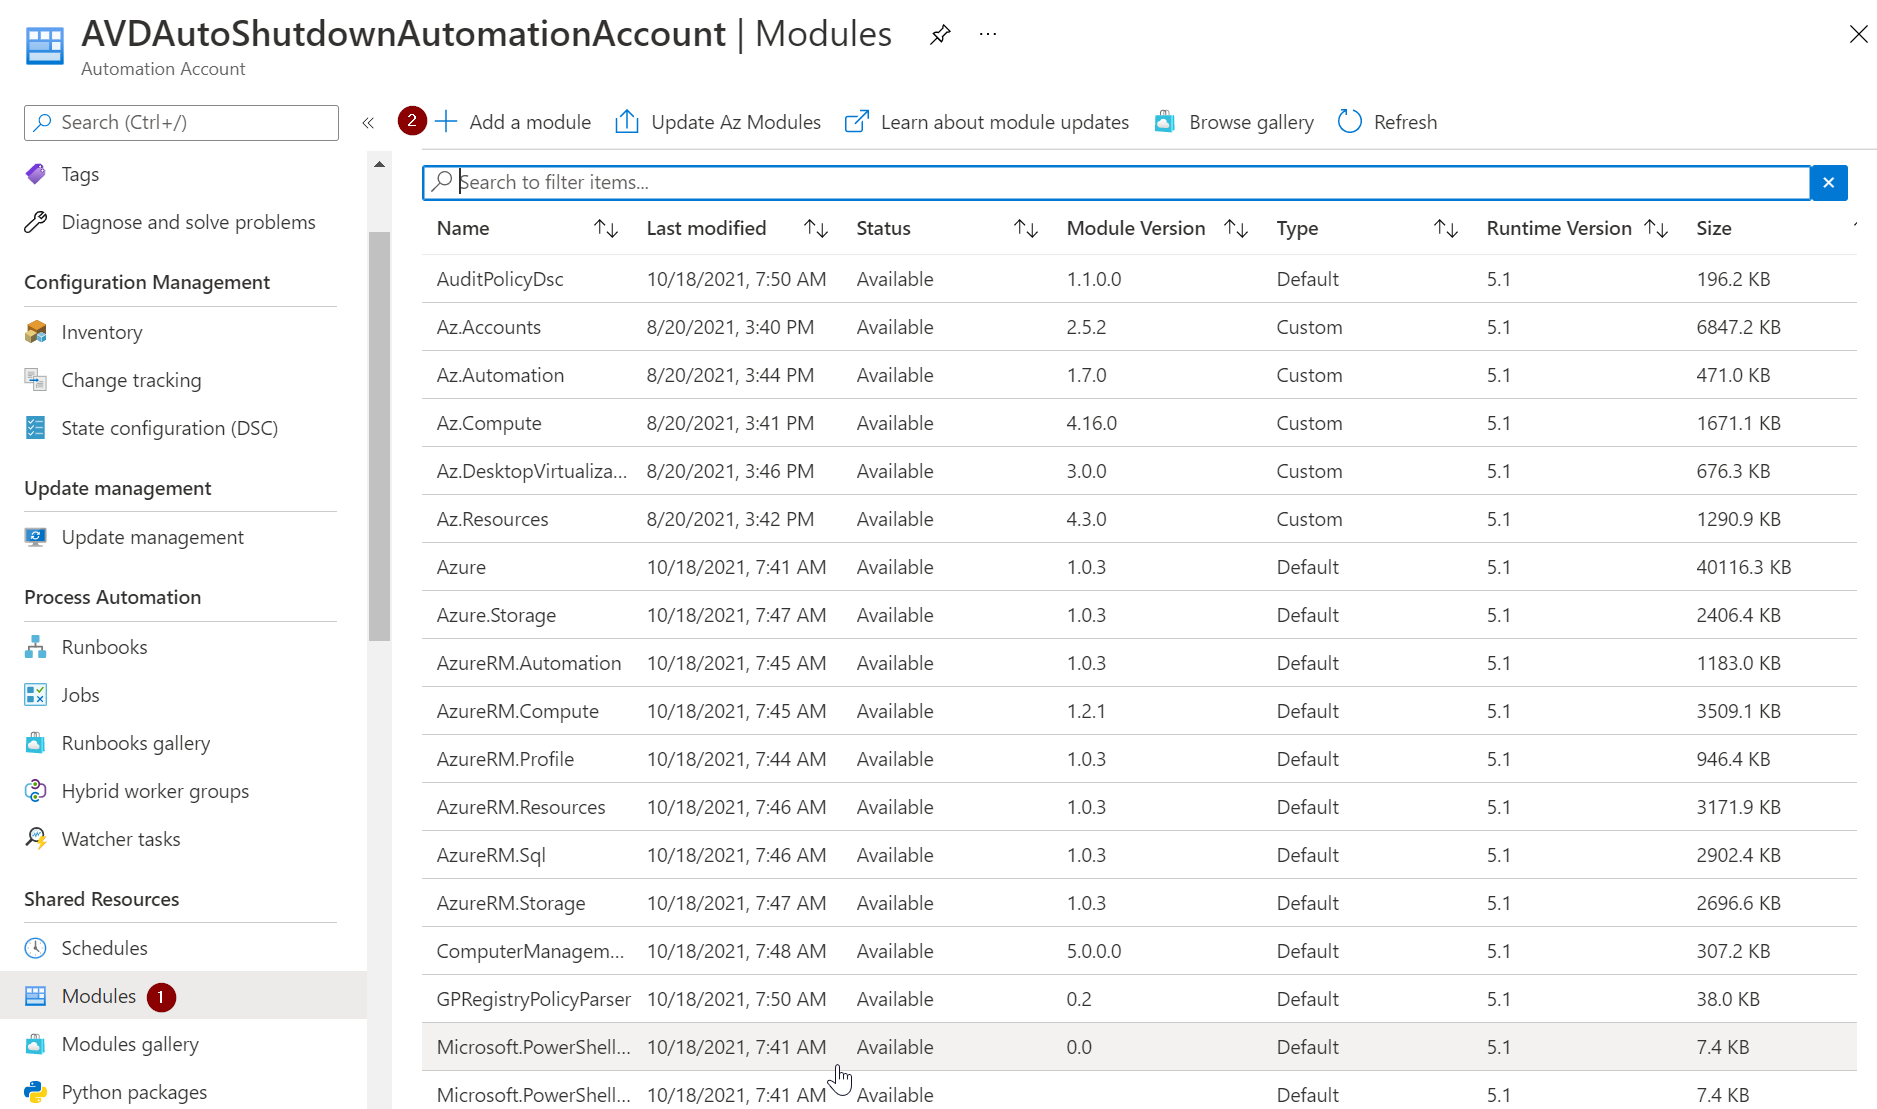 Automation Account modules